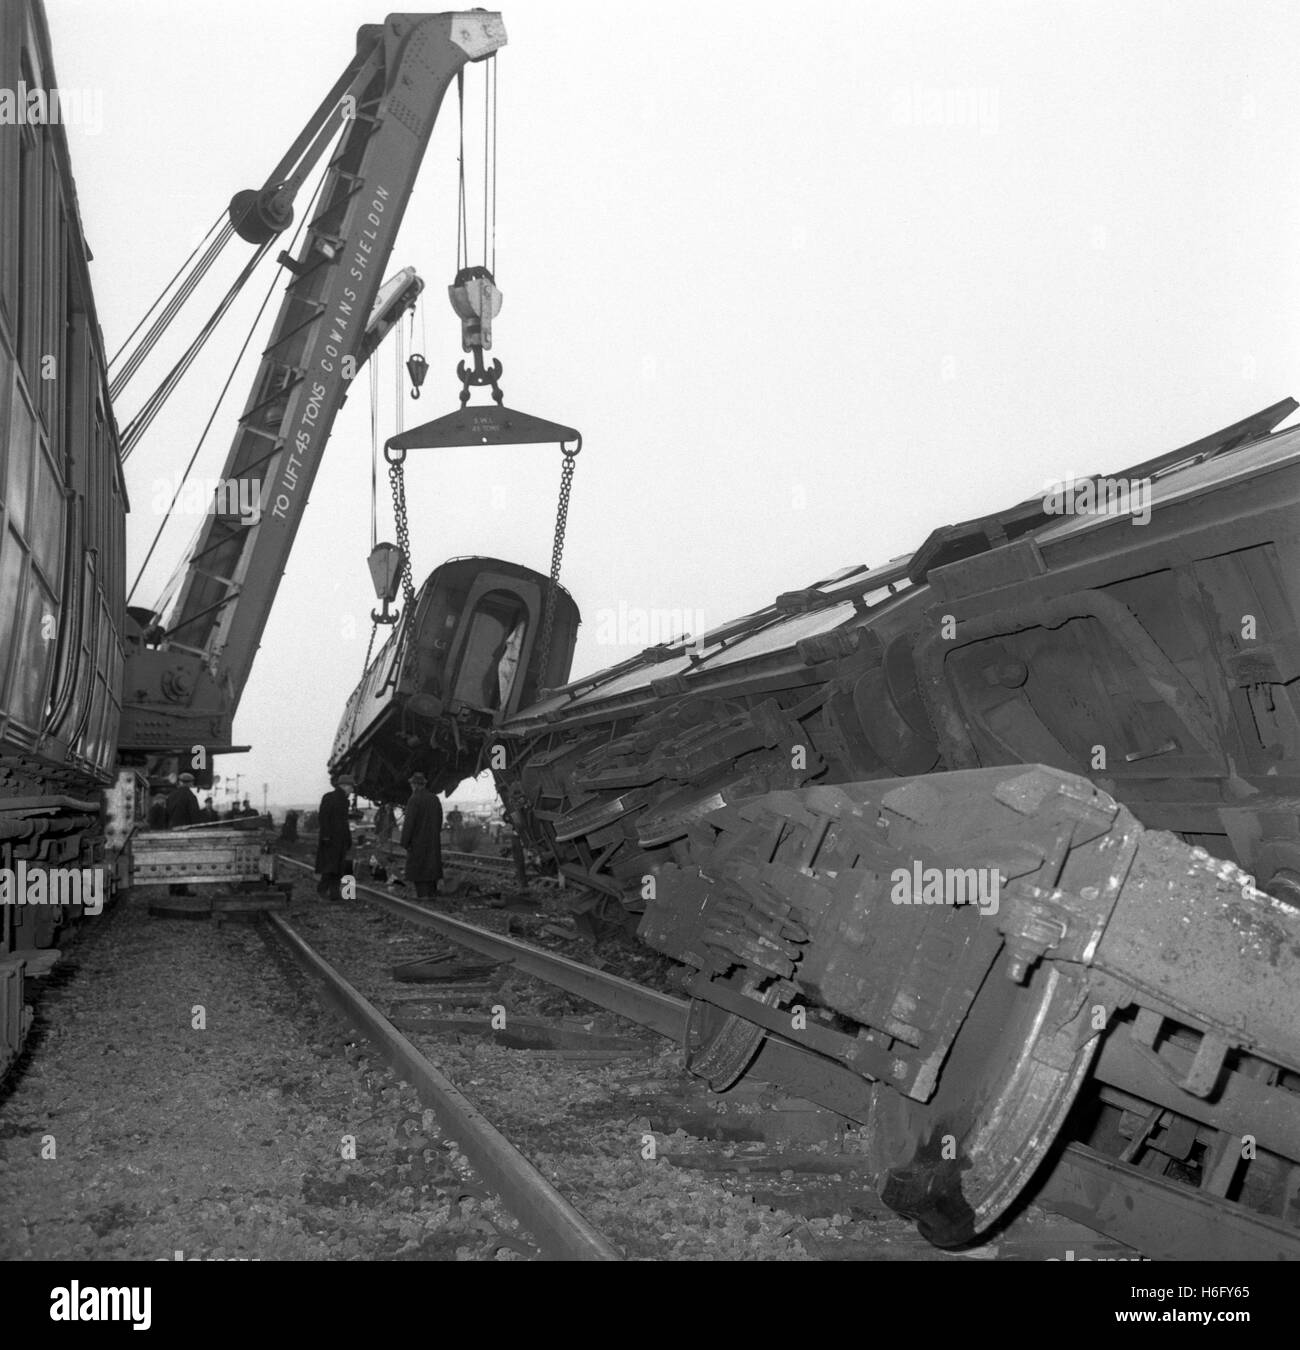 A crane lifting one of the carriages as breakdown gangs worked at dawn to clear the blocked lines after the derailment late last night of the London to Edinburgh express train near the village of Conington, Huntingdonshire, England. Five people were killed and 18 injured in the crash. Stock Photo